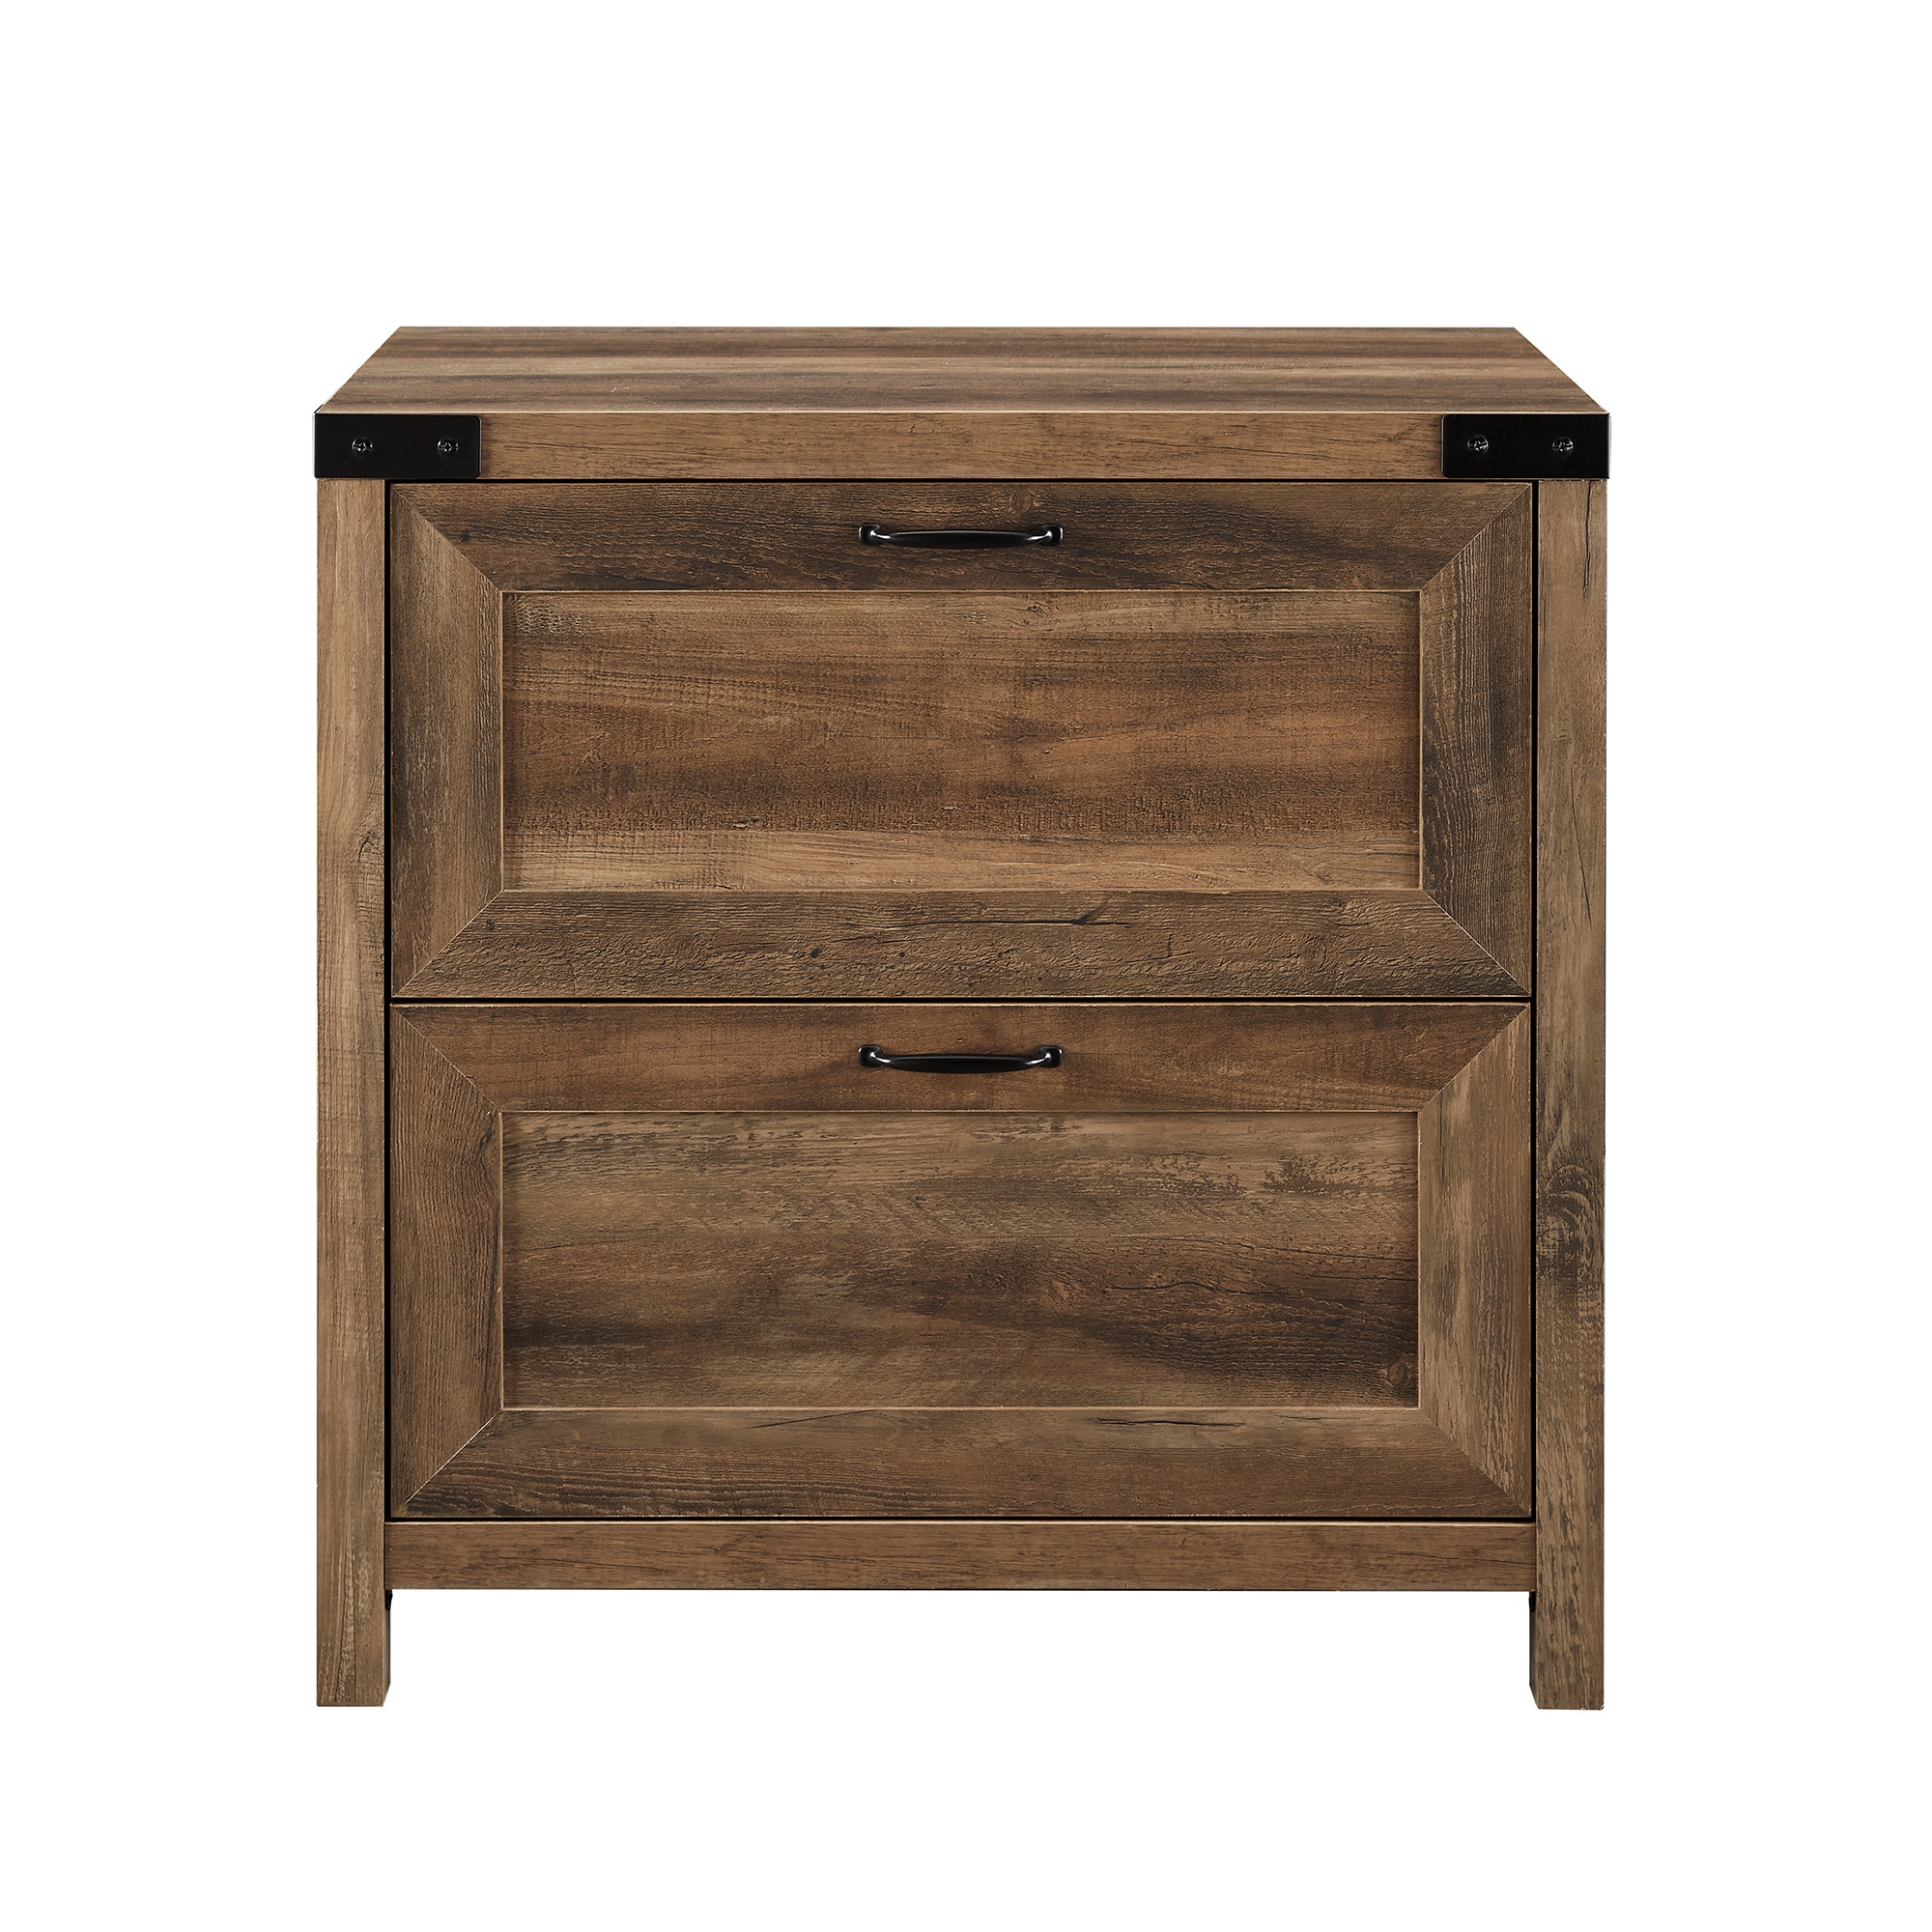 Modern Farmhouse 2-Drawer Filing Cabinet with Metal Accents – Rustic Oak - Image 1